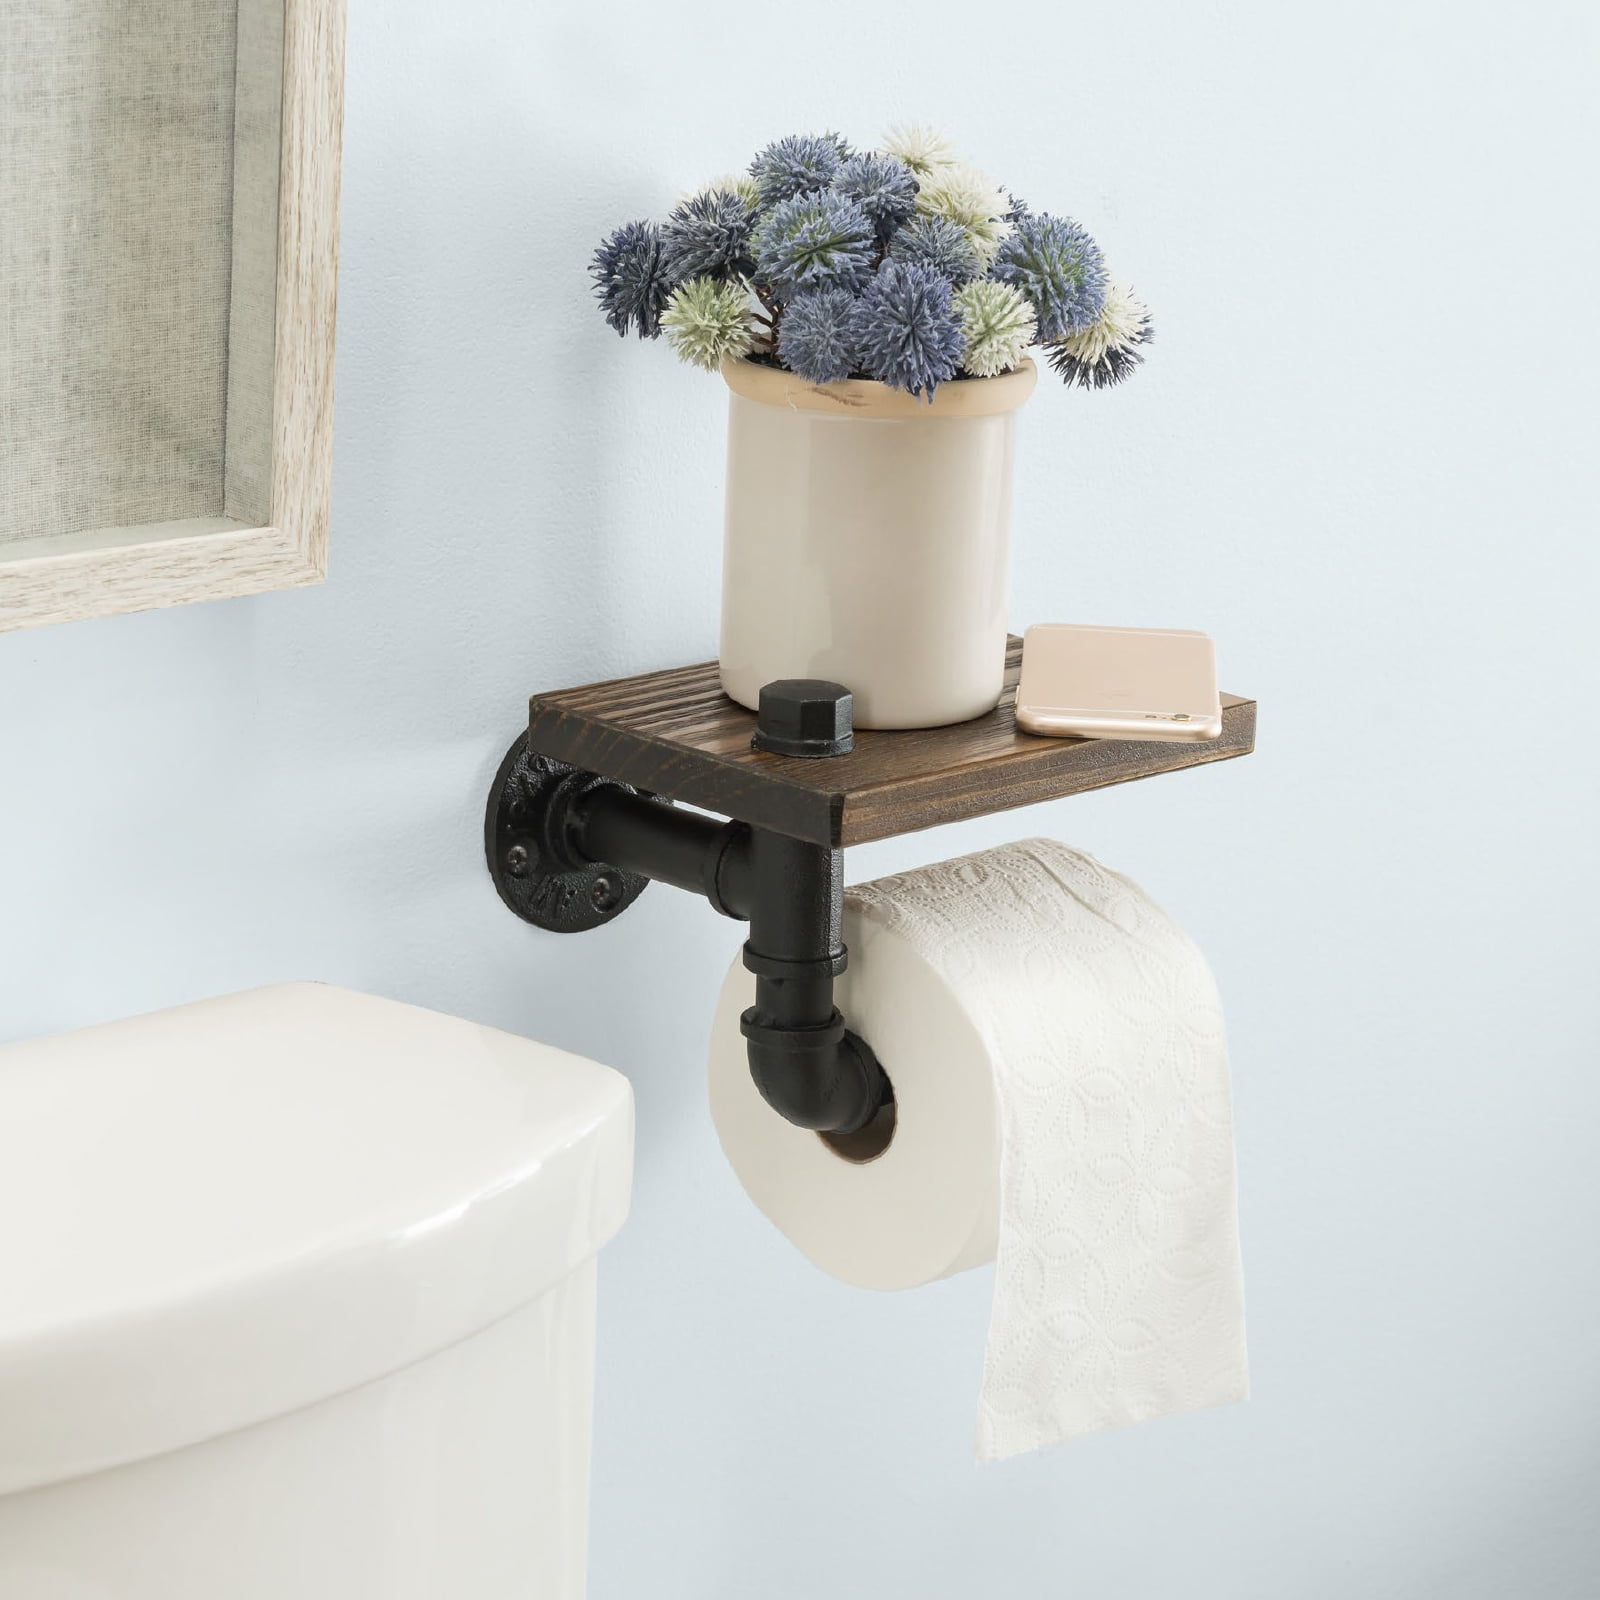 Kitchen Washroom Industrial Toilet Paper Holder Wall Mounted Tissue Roll Hanger with Rustic Wooden Shelf Cast Iron Black Pipe Hardware for Bathroom 